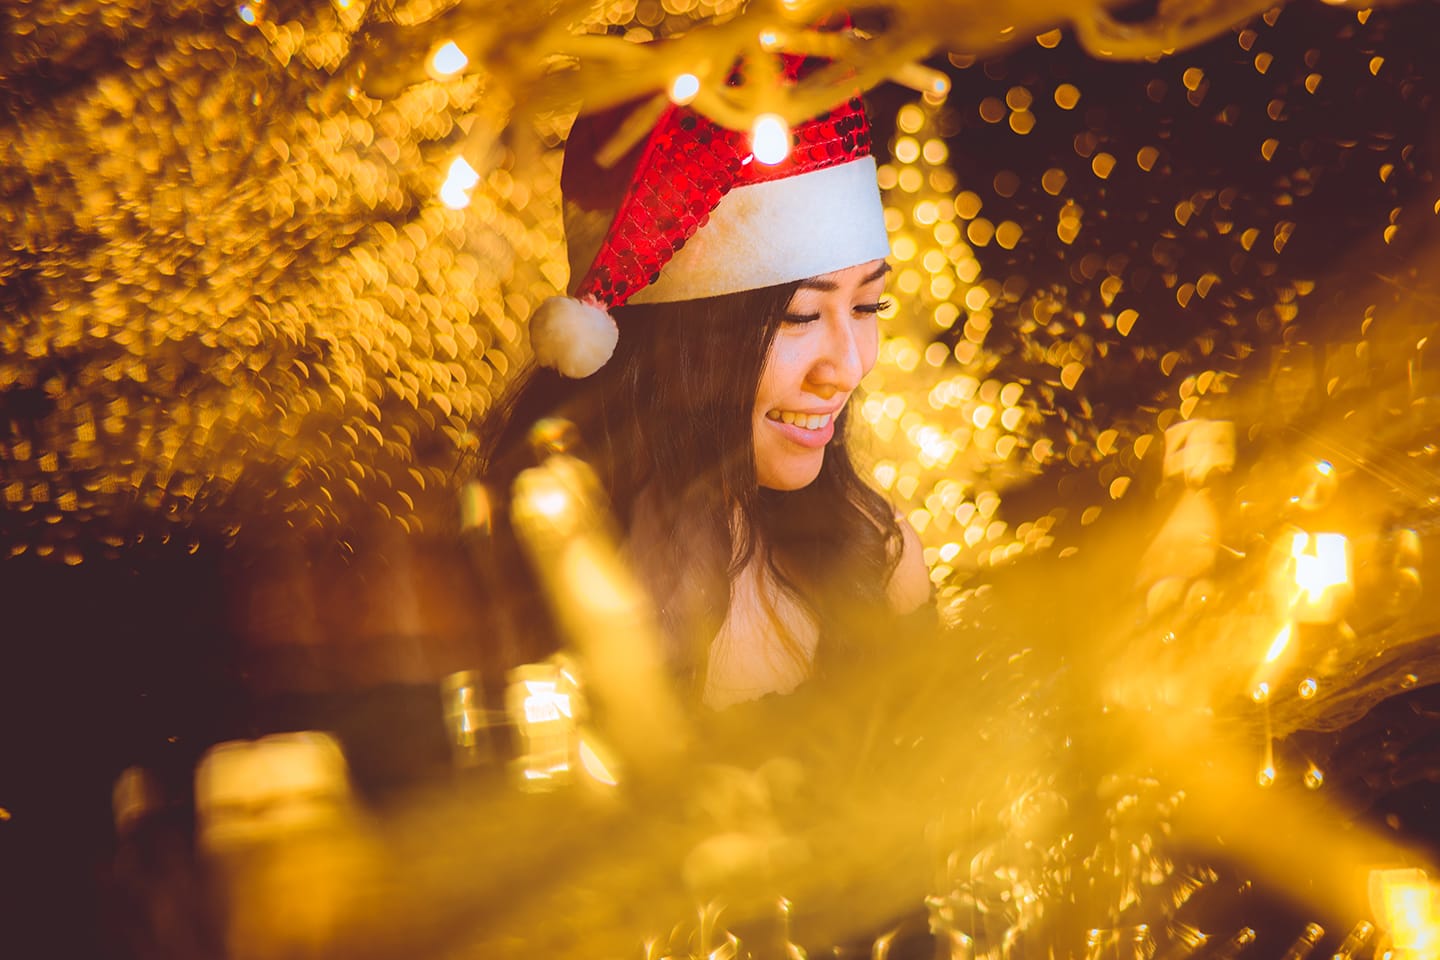 Christmas Photography: Ten Easy Steps To Instantly Improve Your Holiday Photography